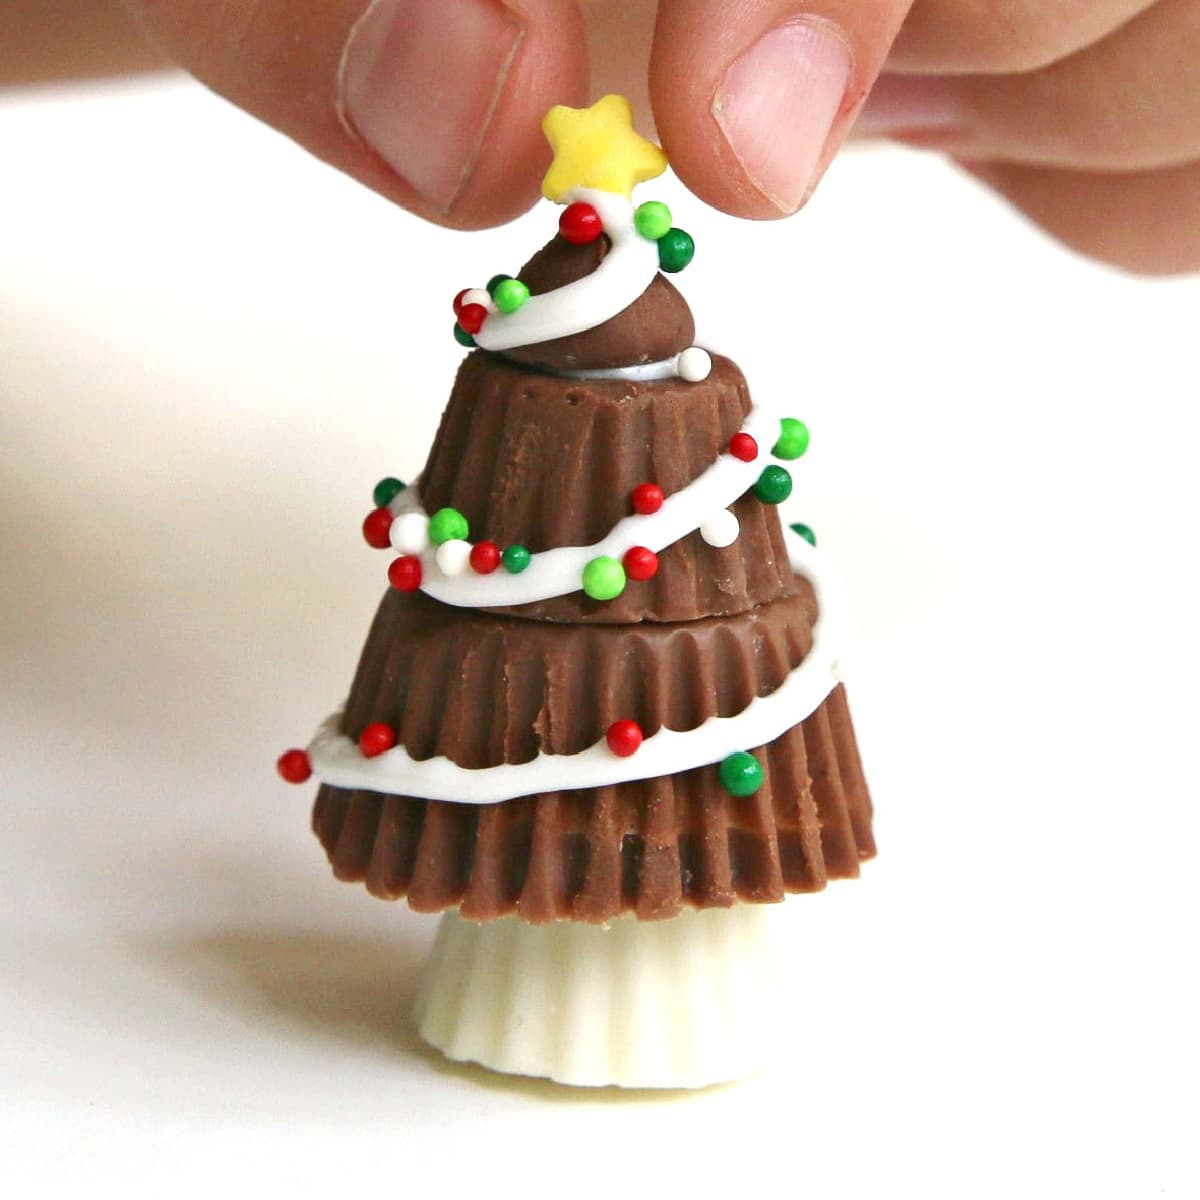 Reese's Peanut Butter Cup Trees feature